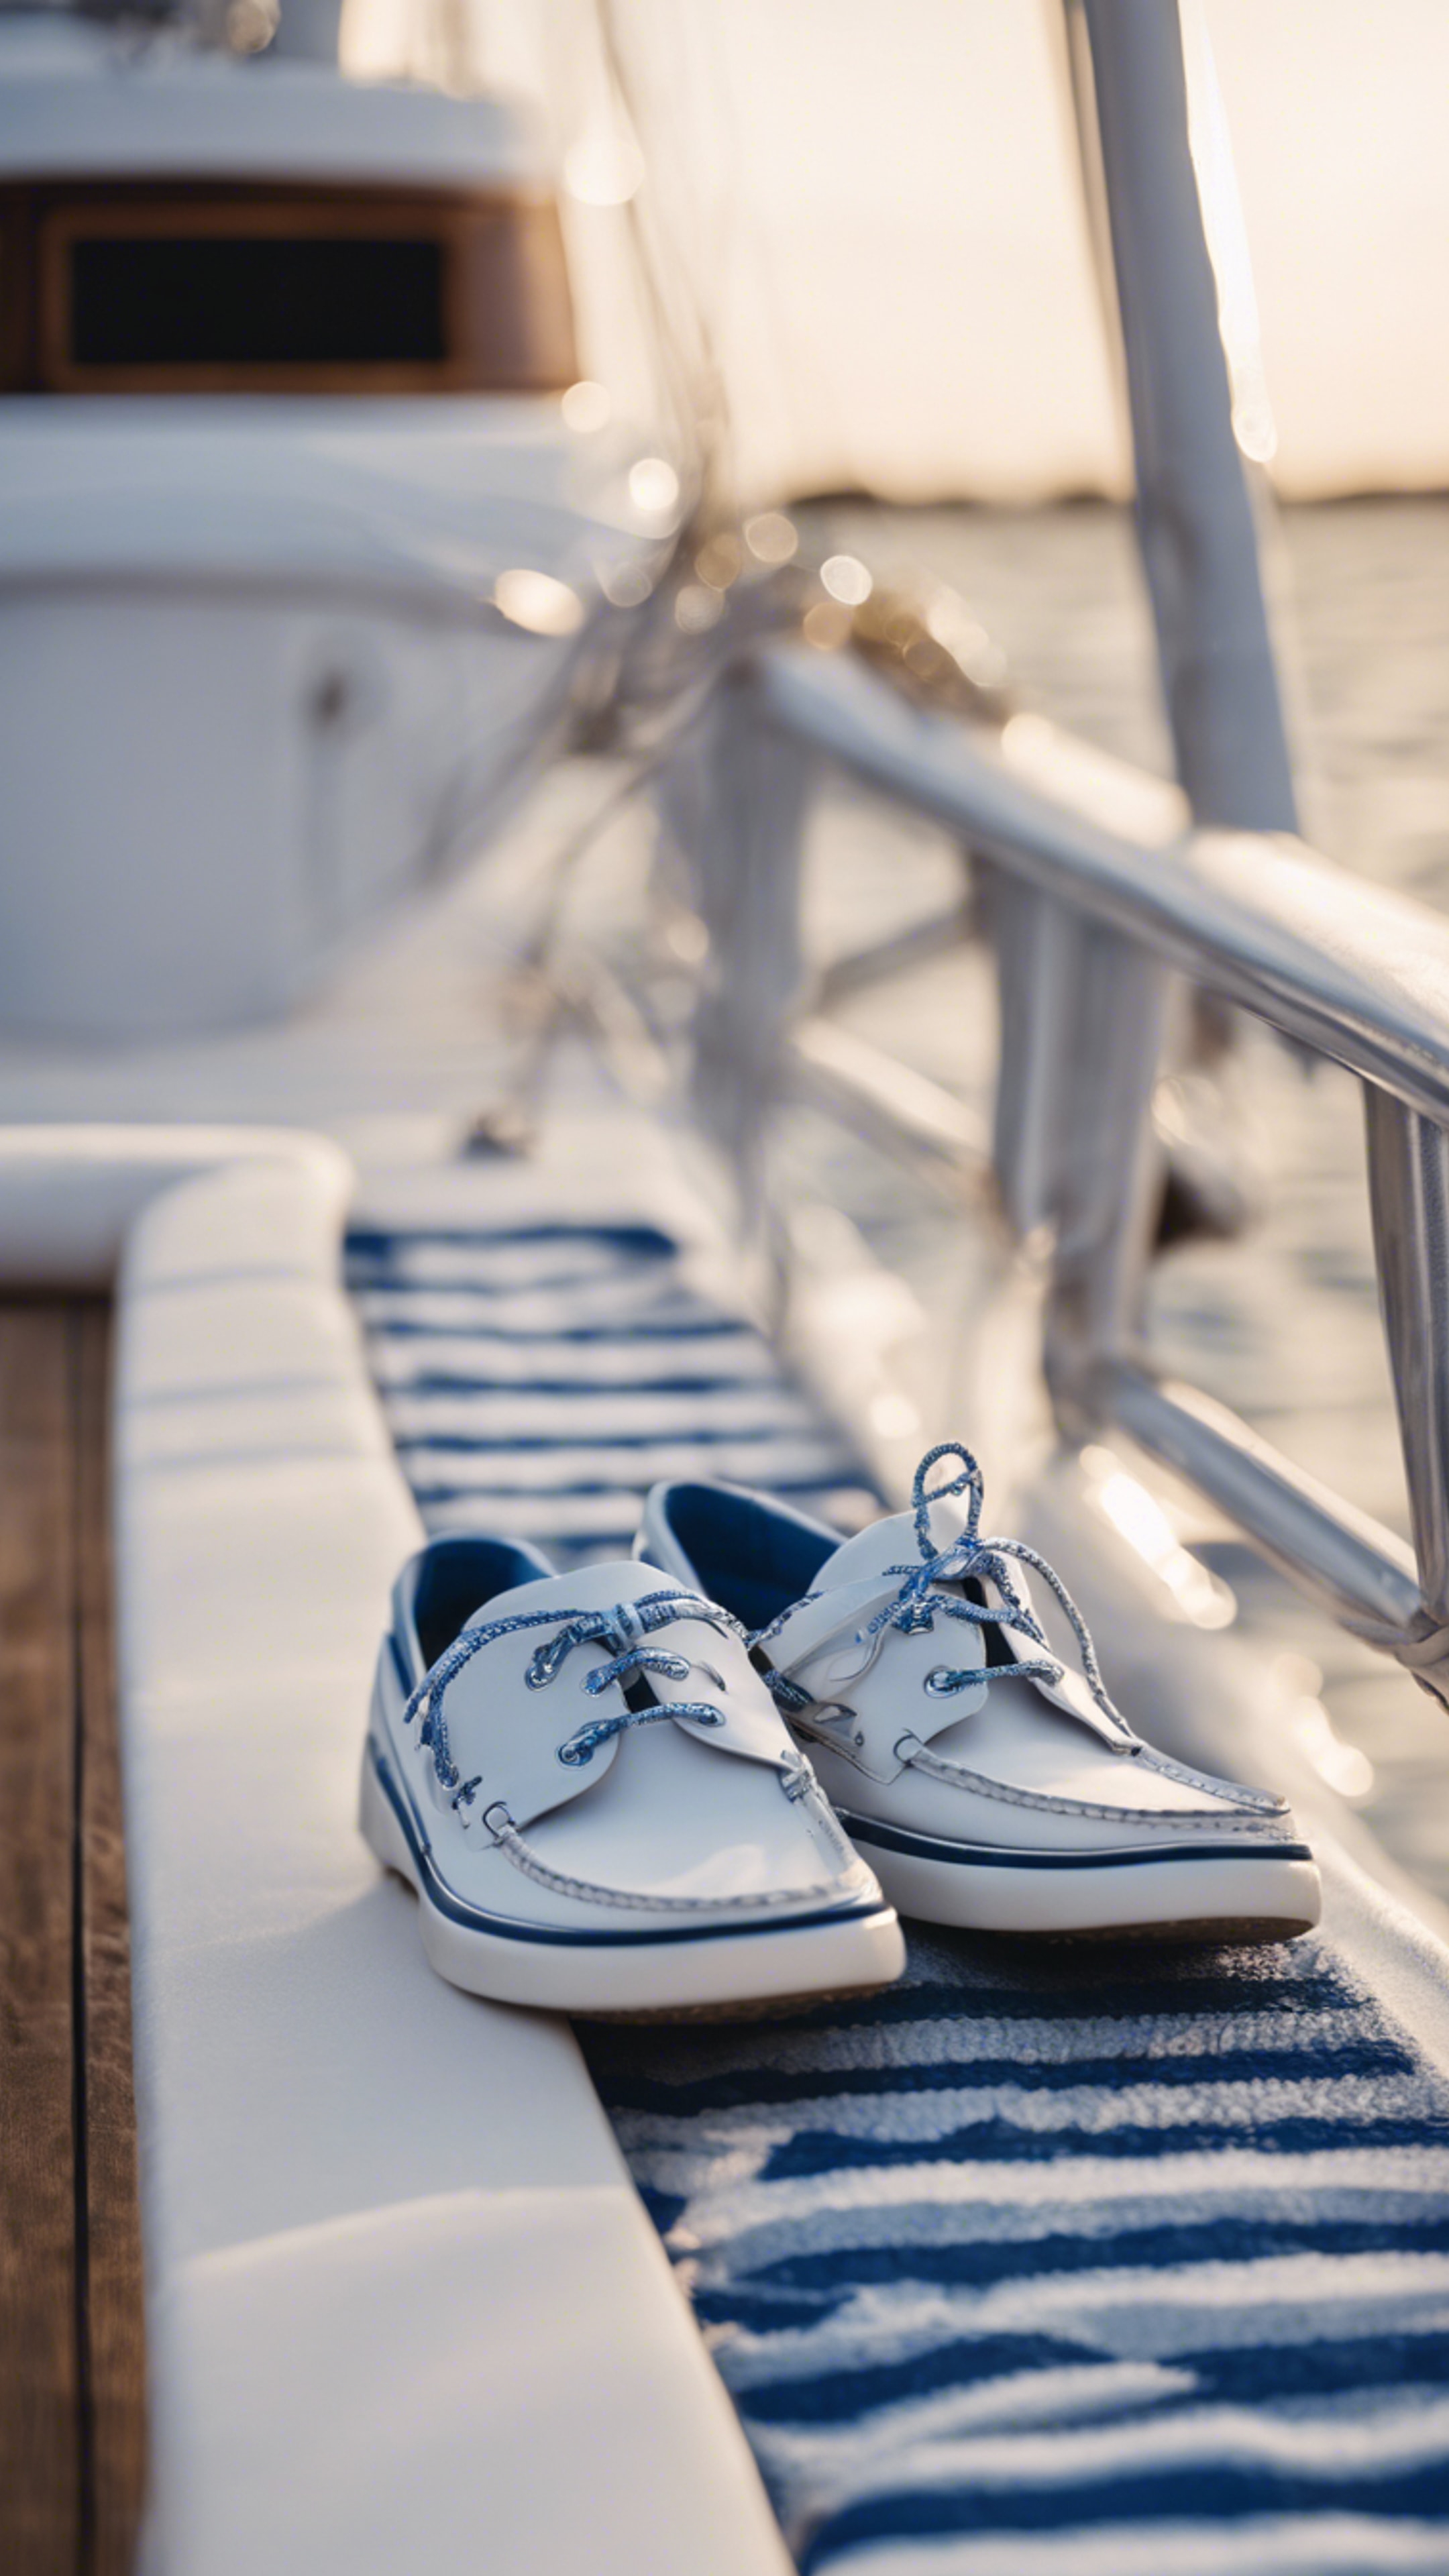 A pair of blue and white boat shoes resting on a yacht deck, reflecting preppy fashion. 牆紙[e5e4a620cbd541dd8bee]